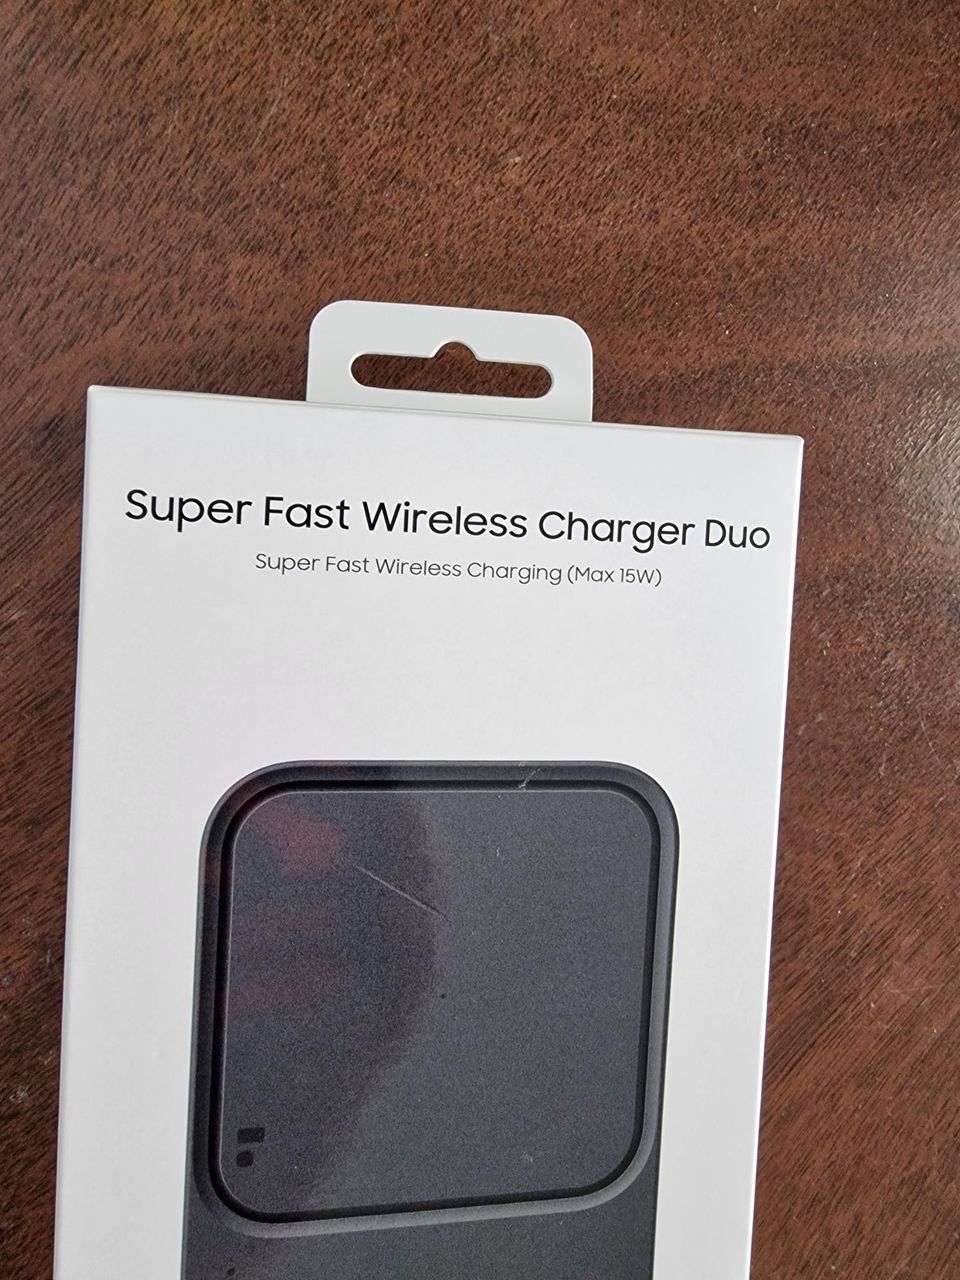 Samsung Wireless charger duo.